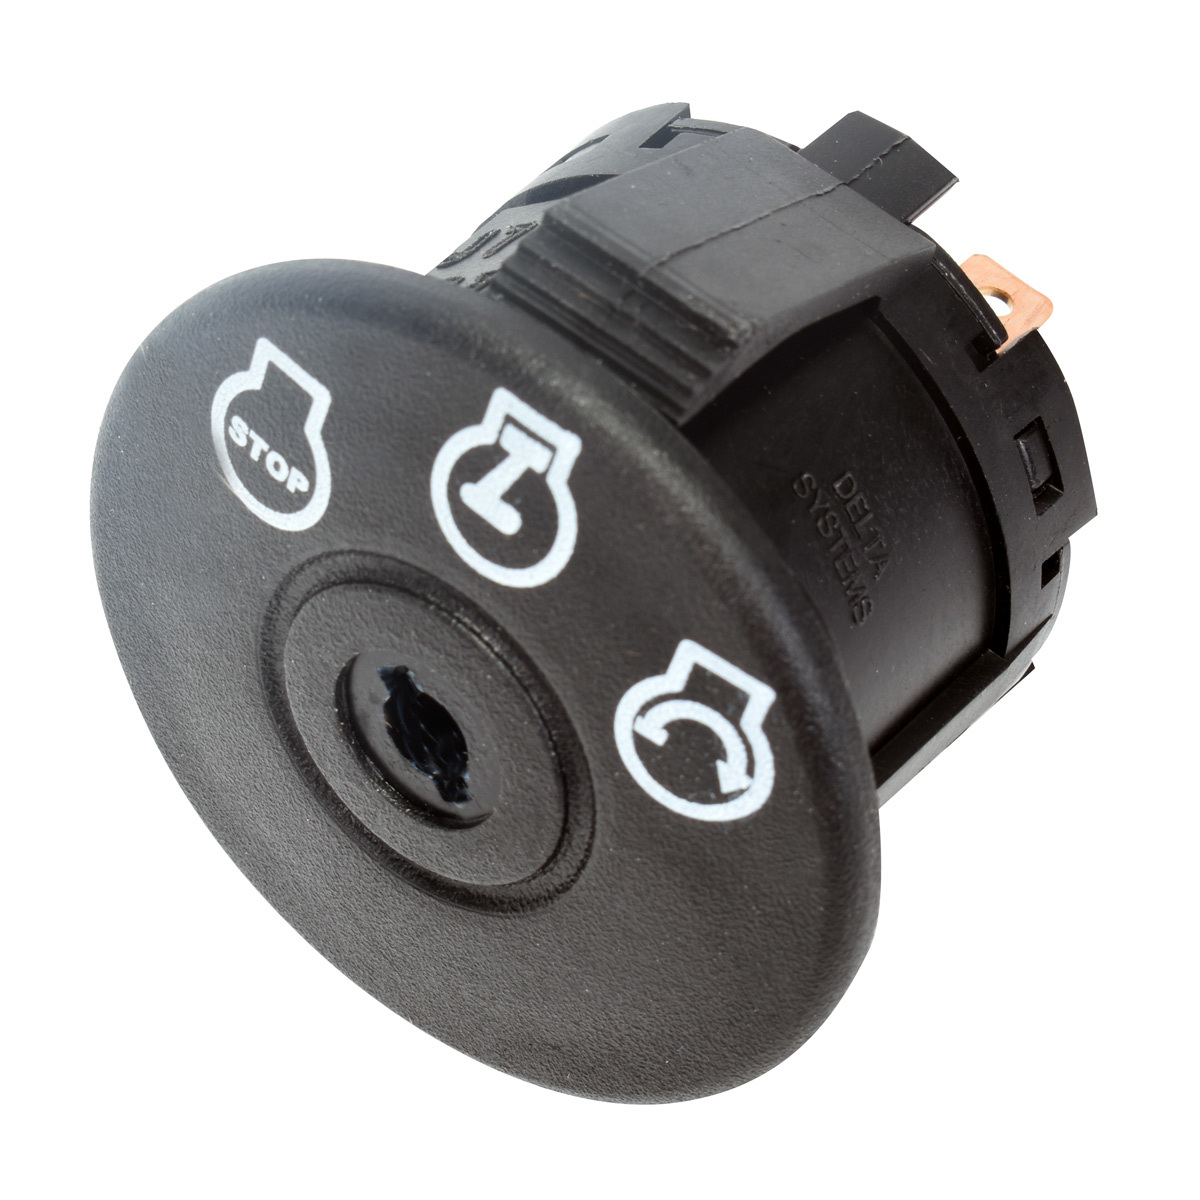 Details about   Starter Ignition Switch replaces John Deere X105 X110 X115R X120 X125 X130R 